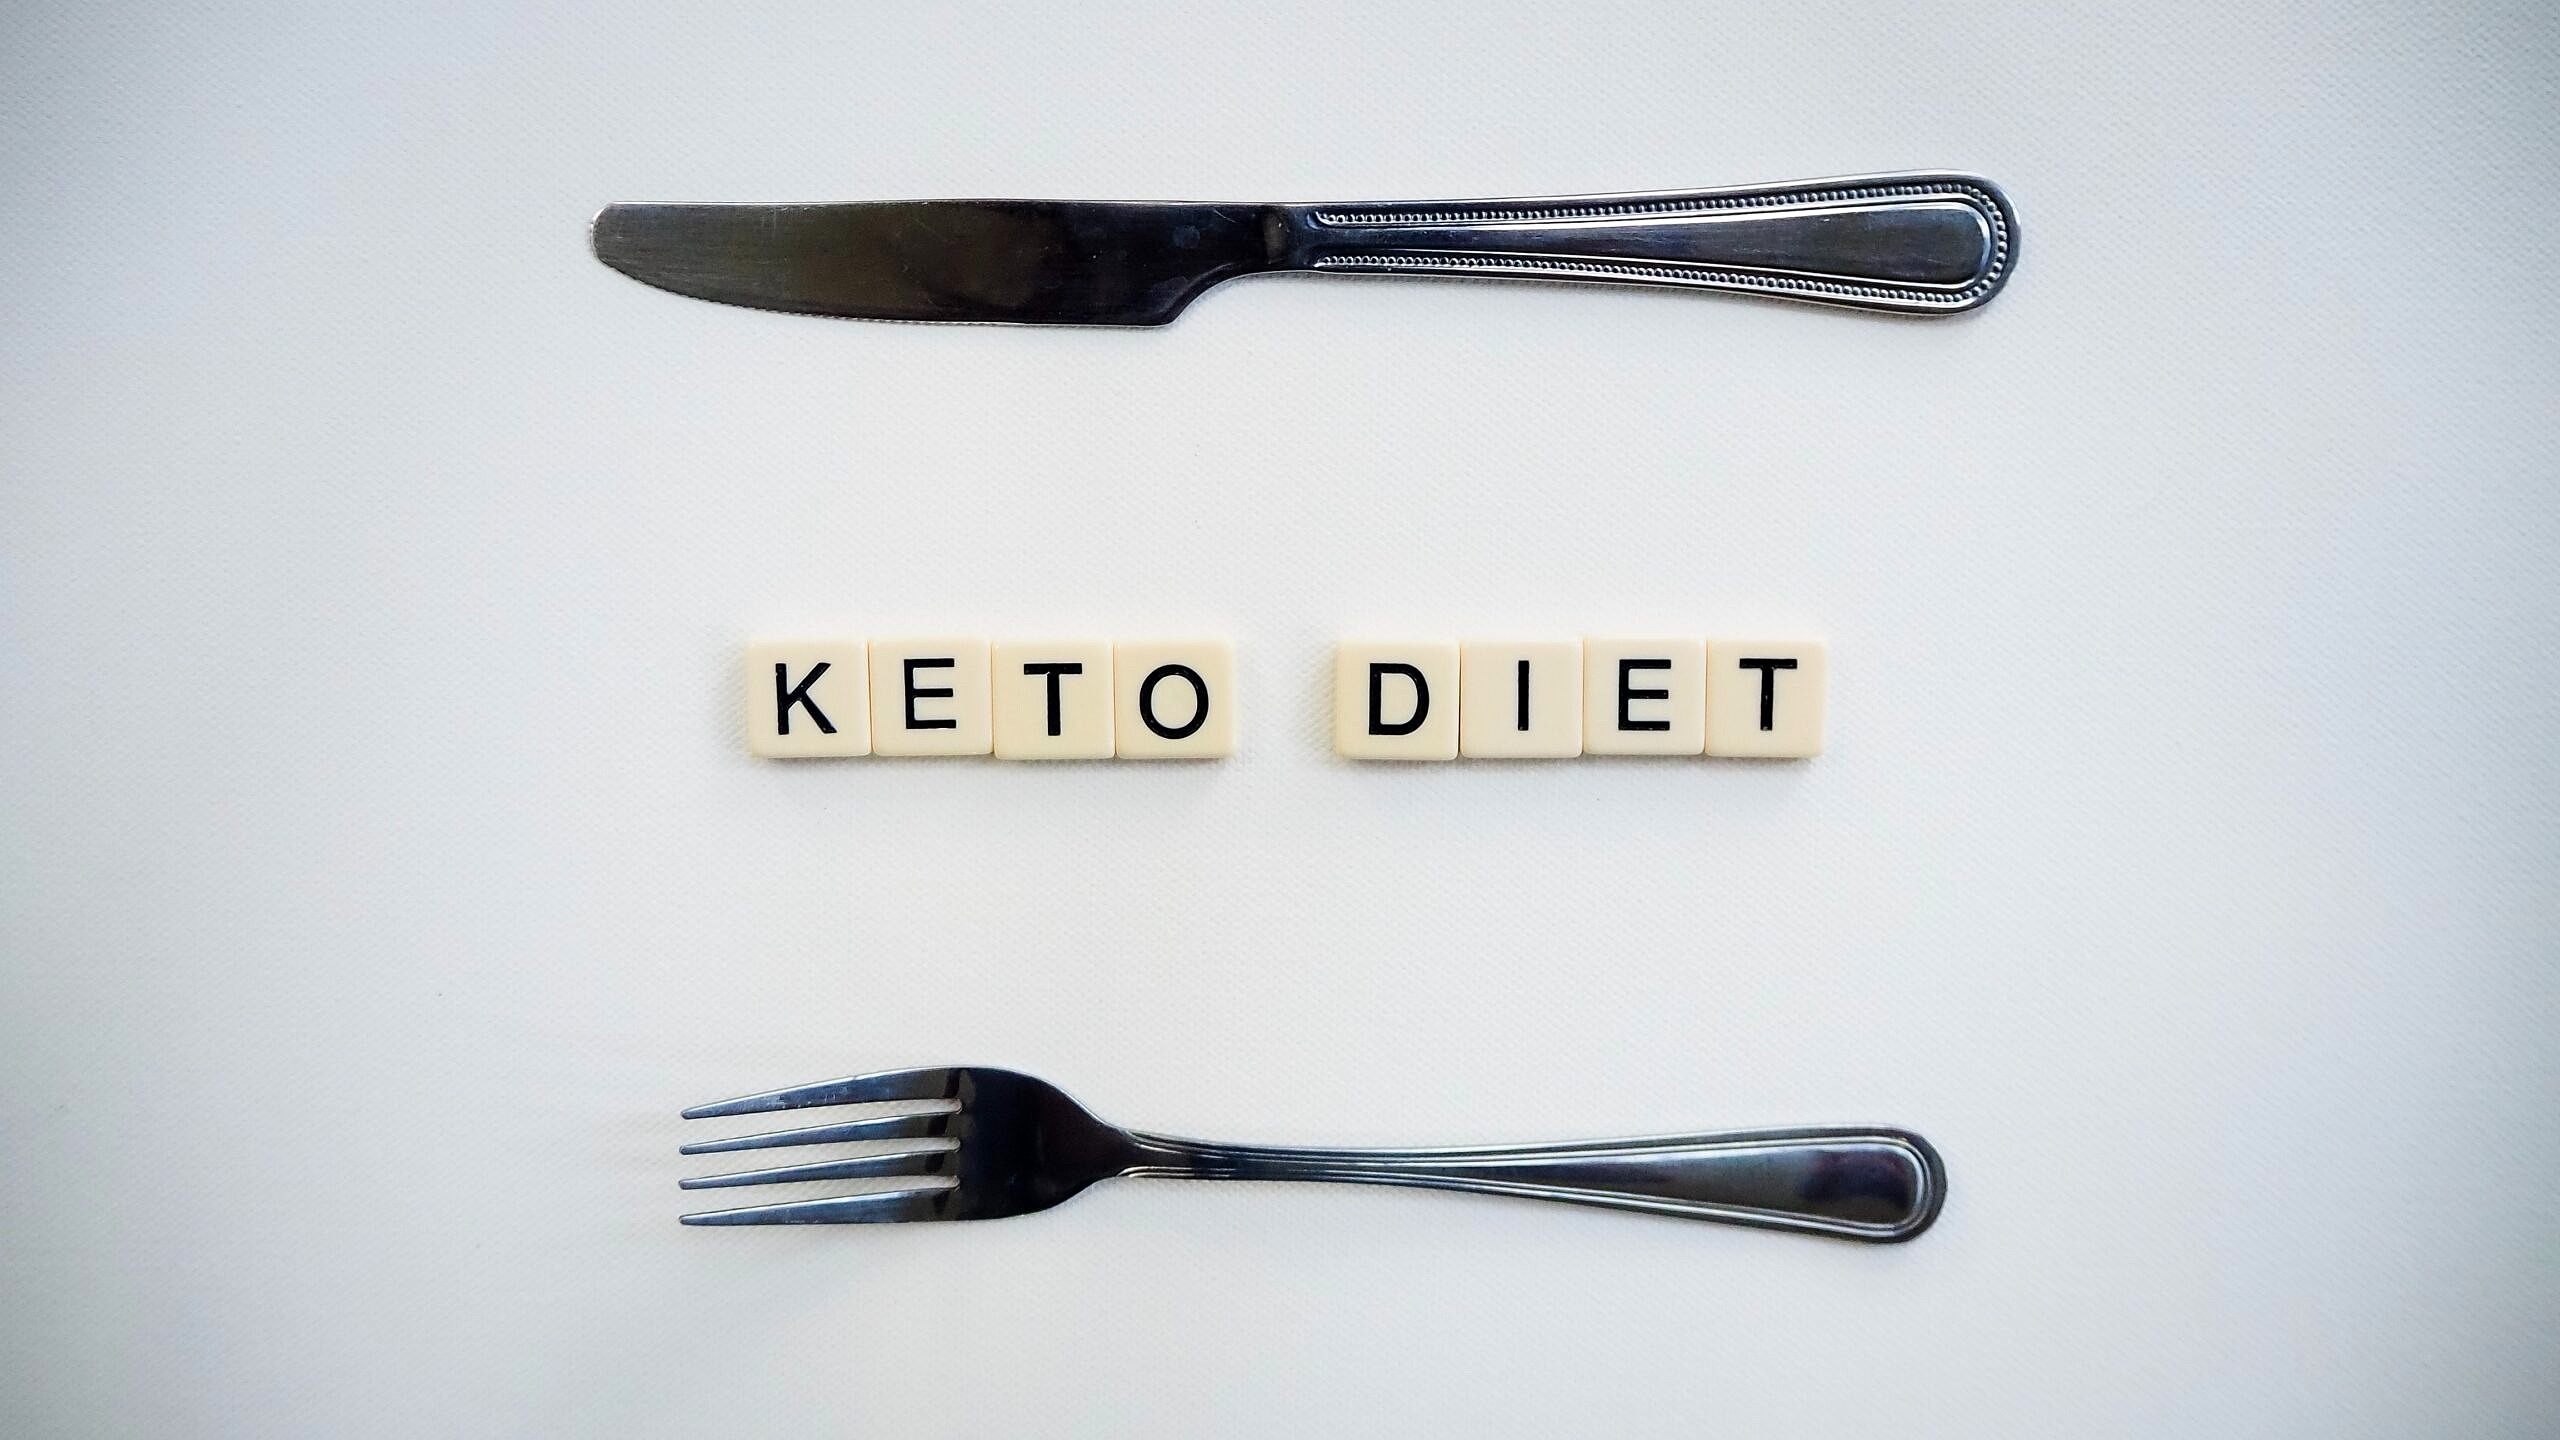 Grey background with two forks and letters spelling "keto diet".